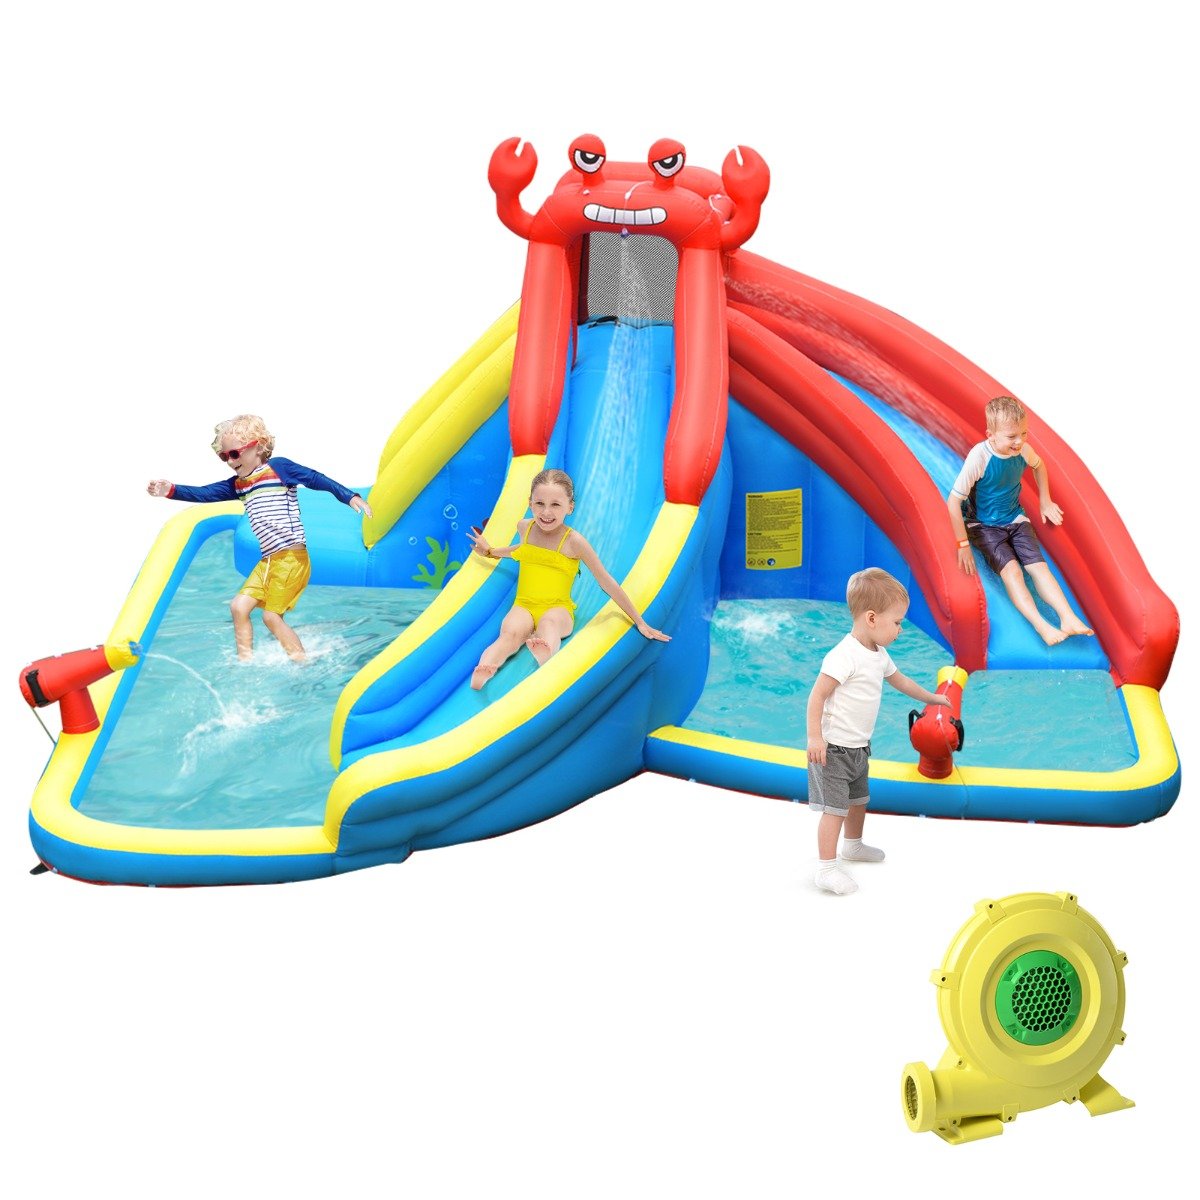 Crab Inflatable Water Slide: The Ultimate Water Adventure!